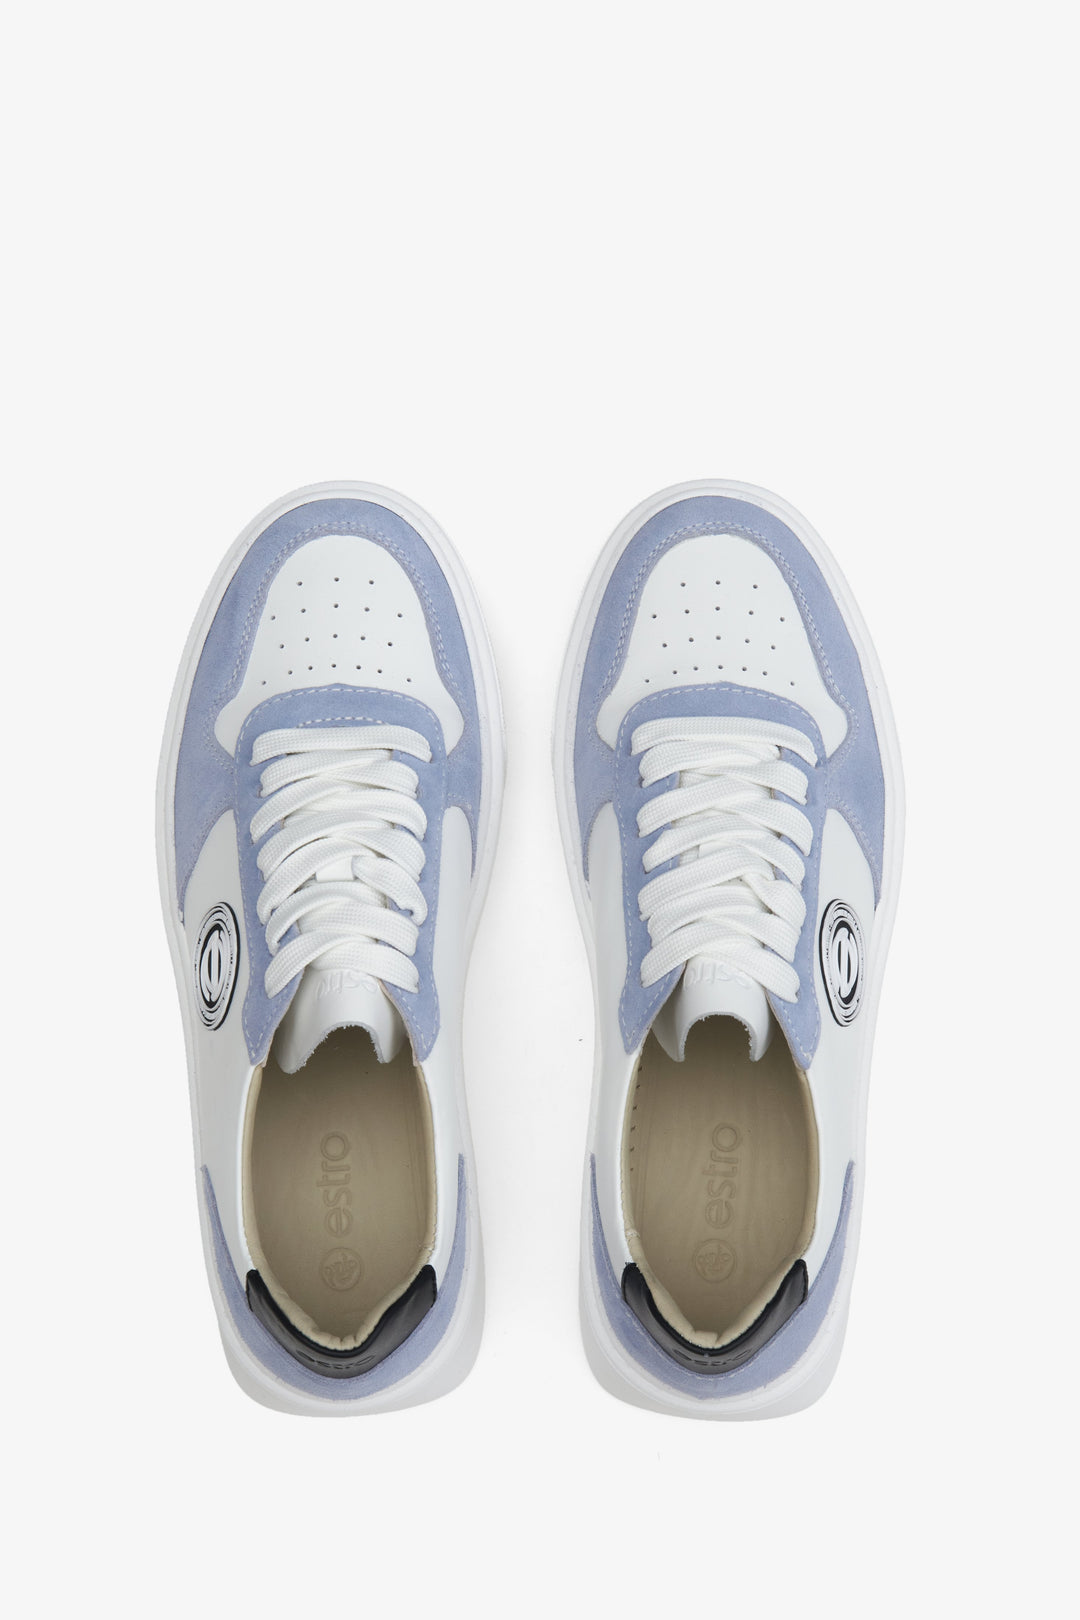 Blue and white leather and natural velvet women's sneakers - presentation of the footwear from above.